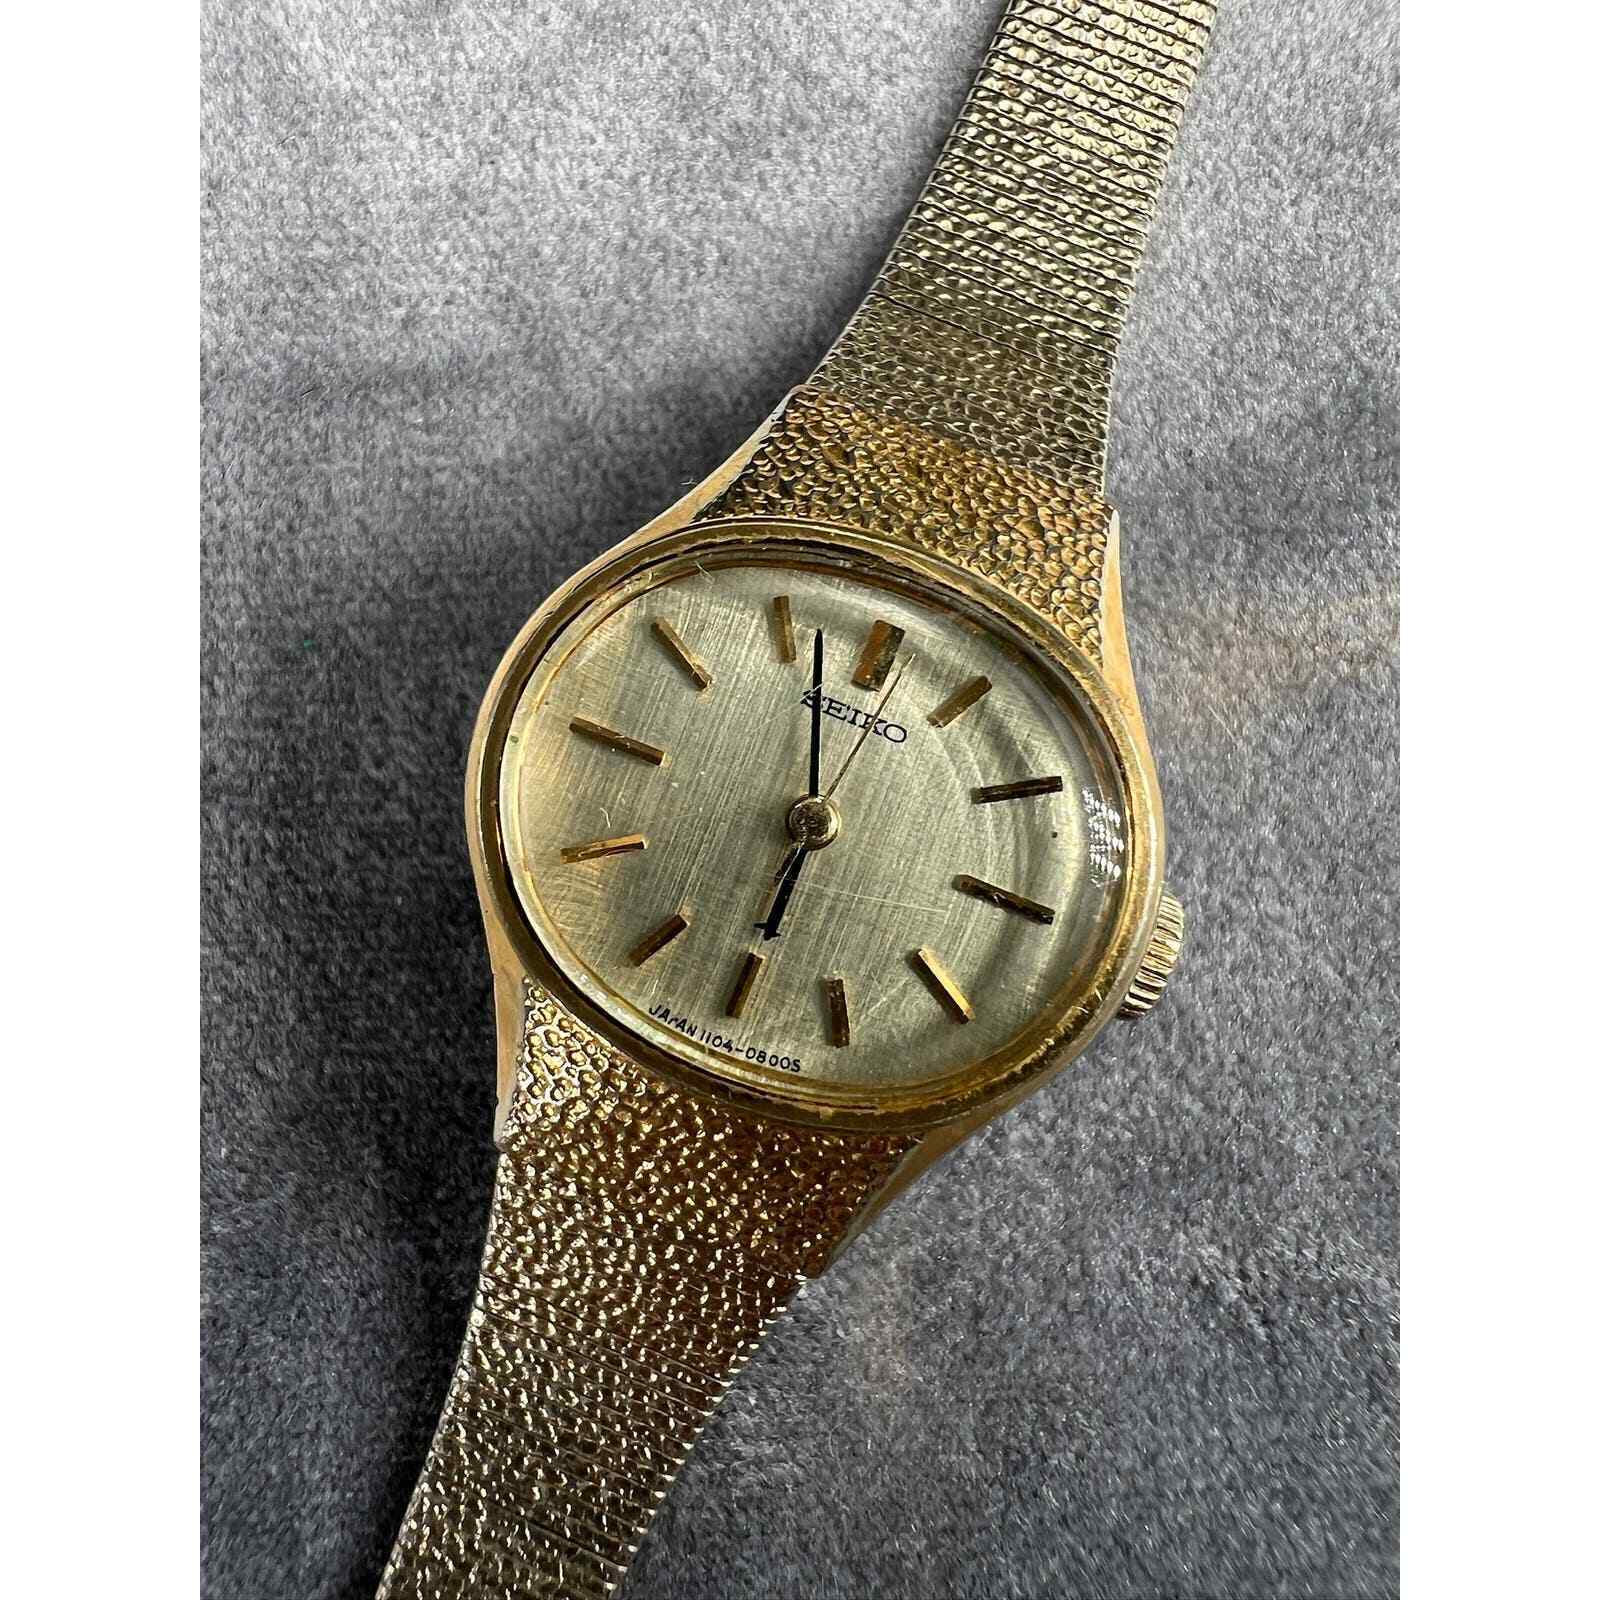 Vintage 1970s Seiko 1104-7140 Gold Tone Cocktail Watch, Mechanical Watch Running